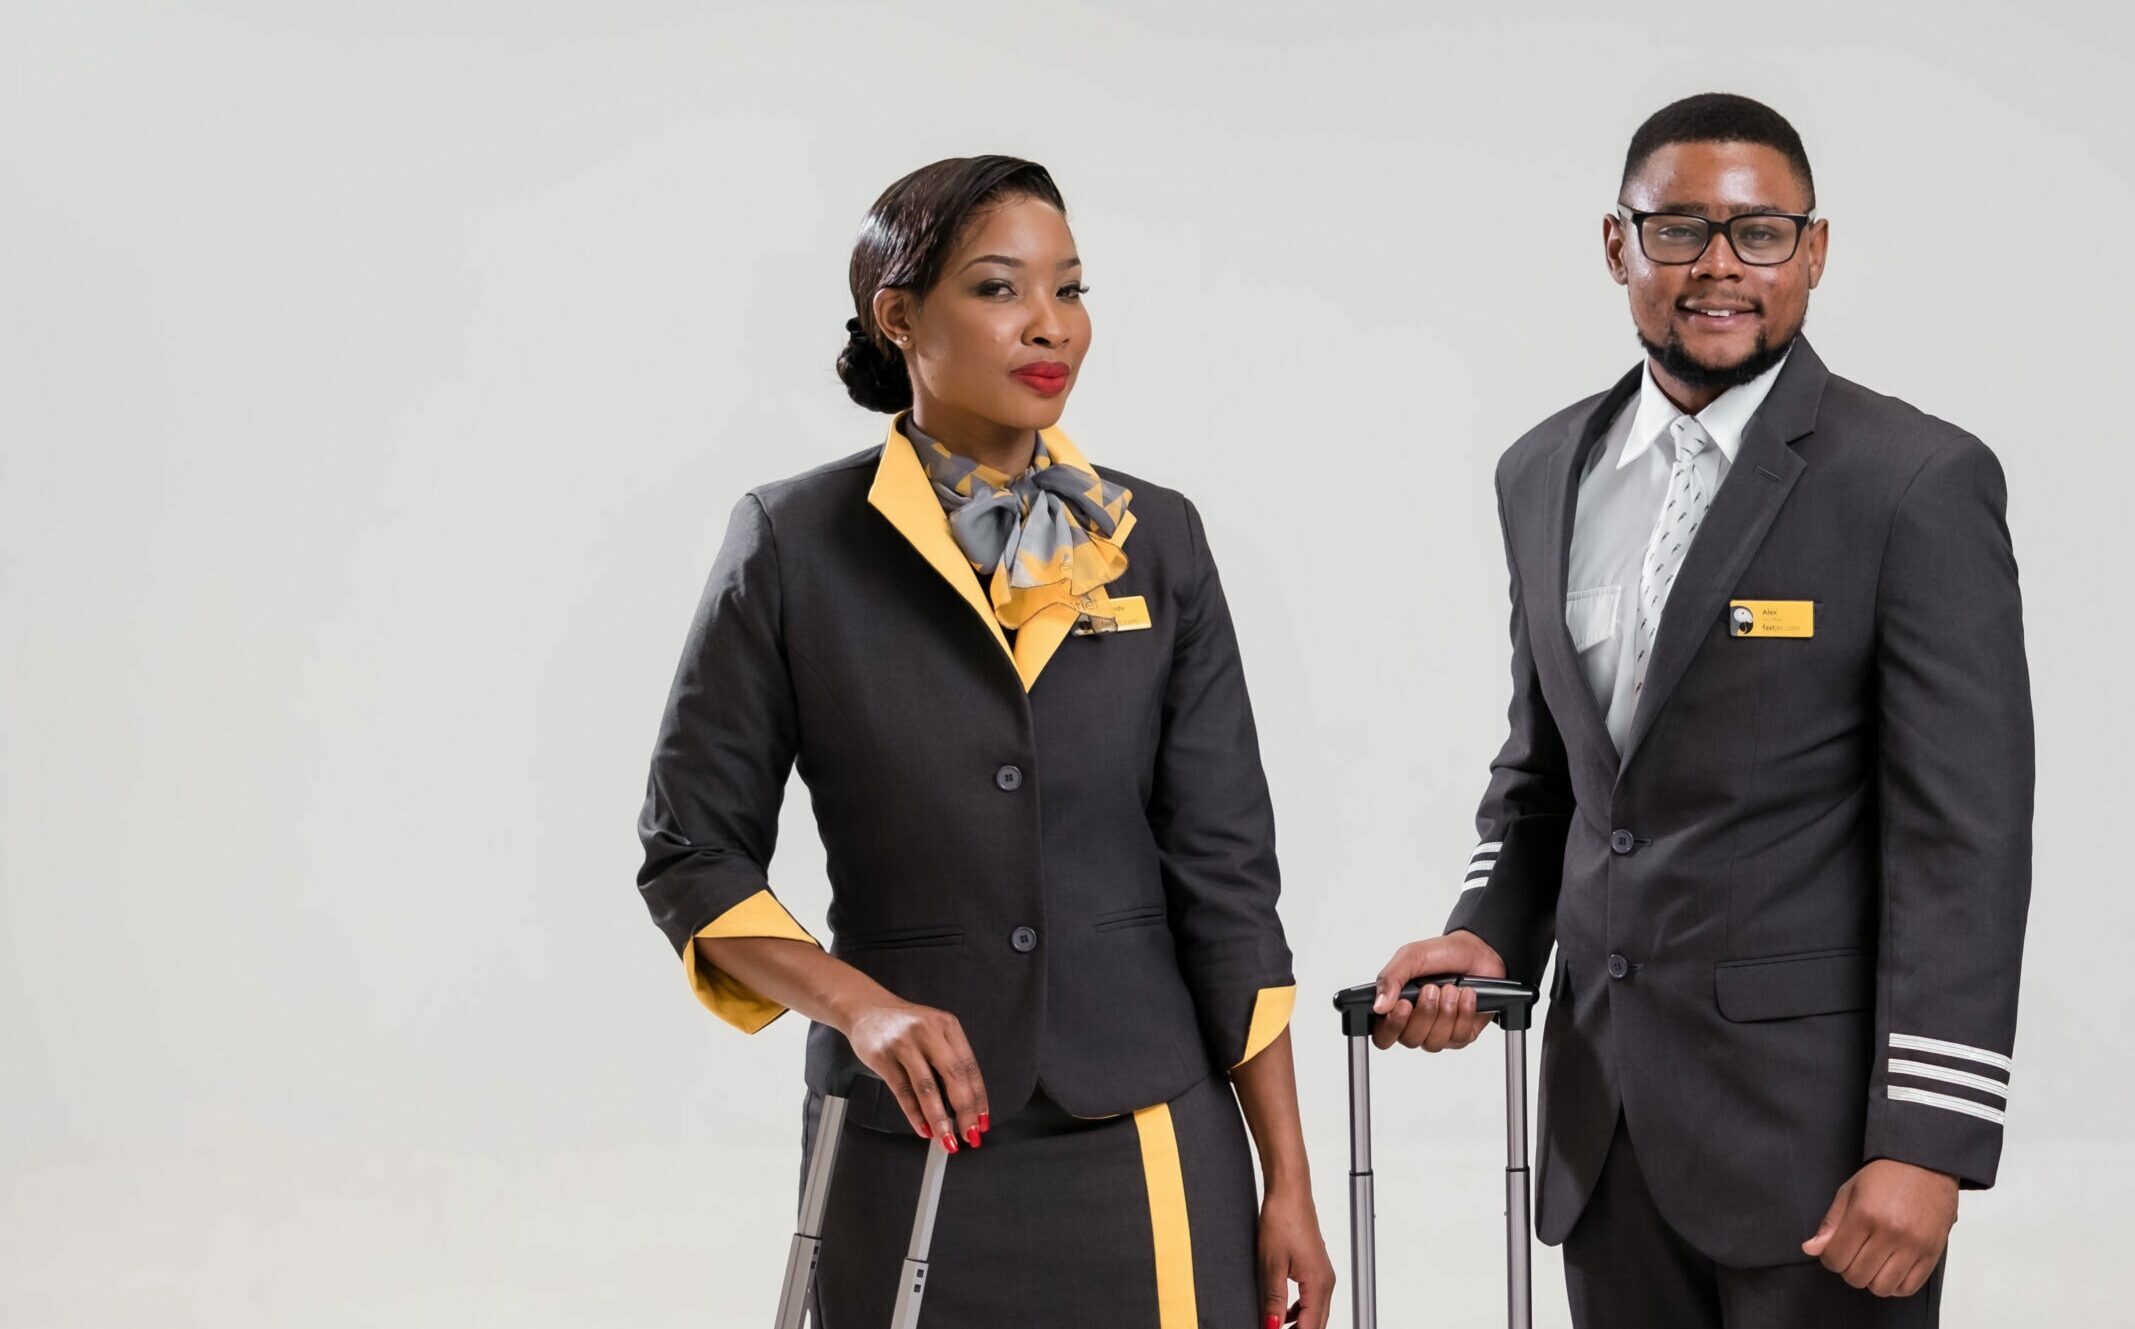 <strong>FASTJET LAUNCHES NEW STAFF UNIFORMS</strong>